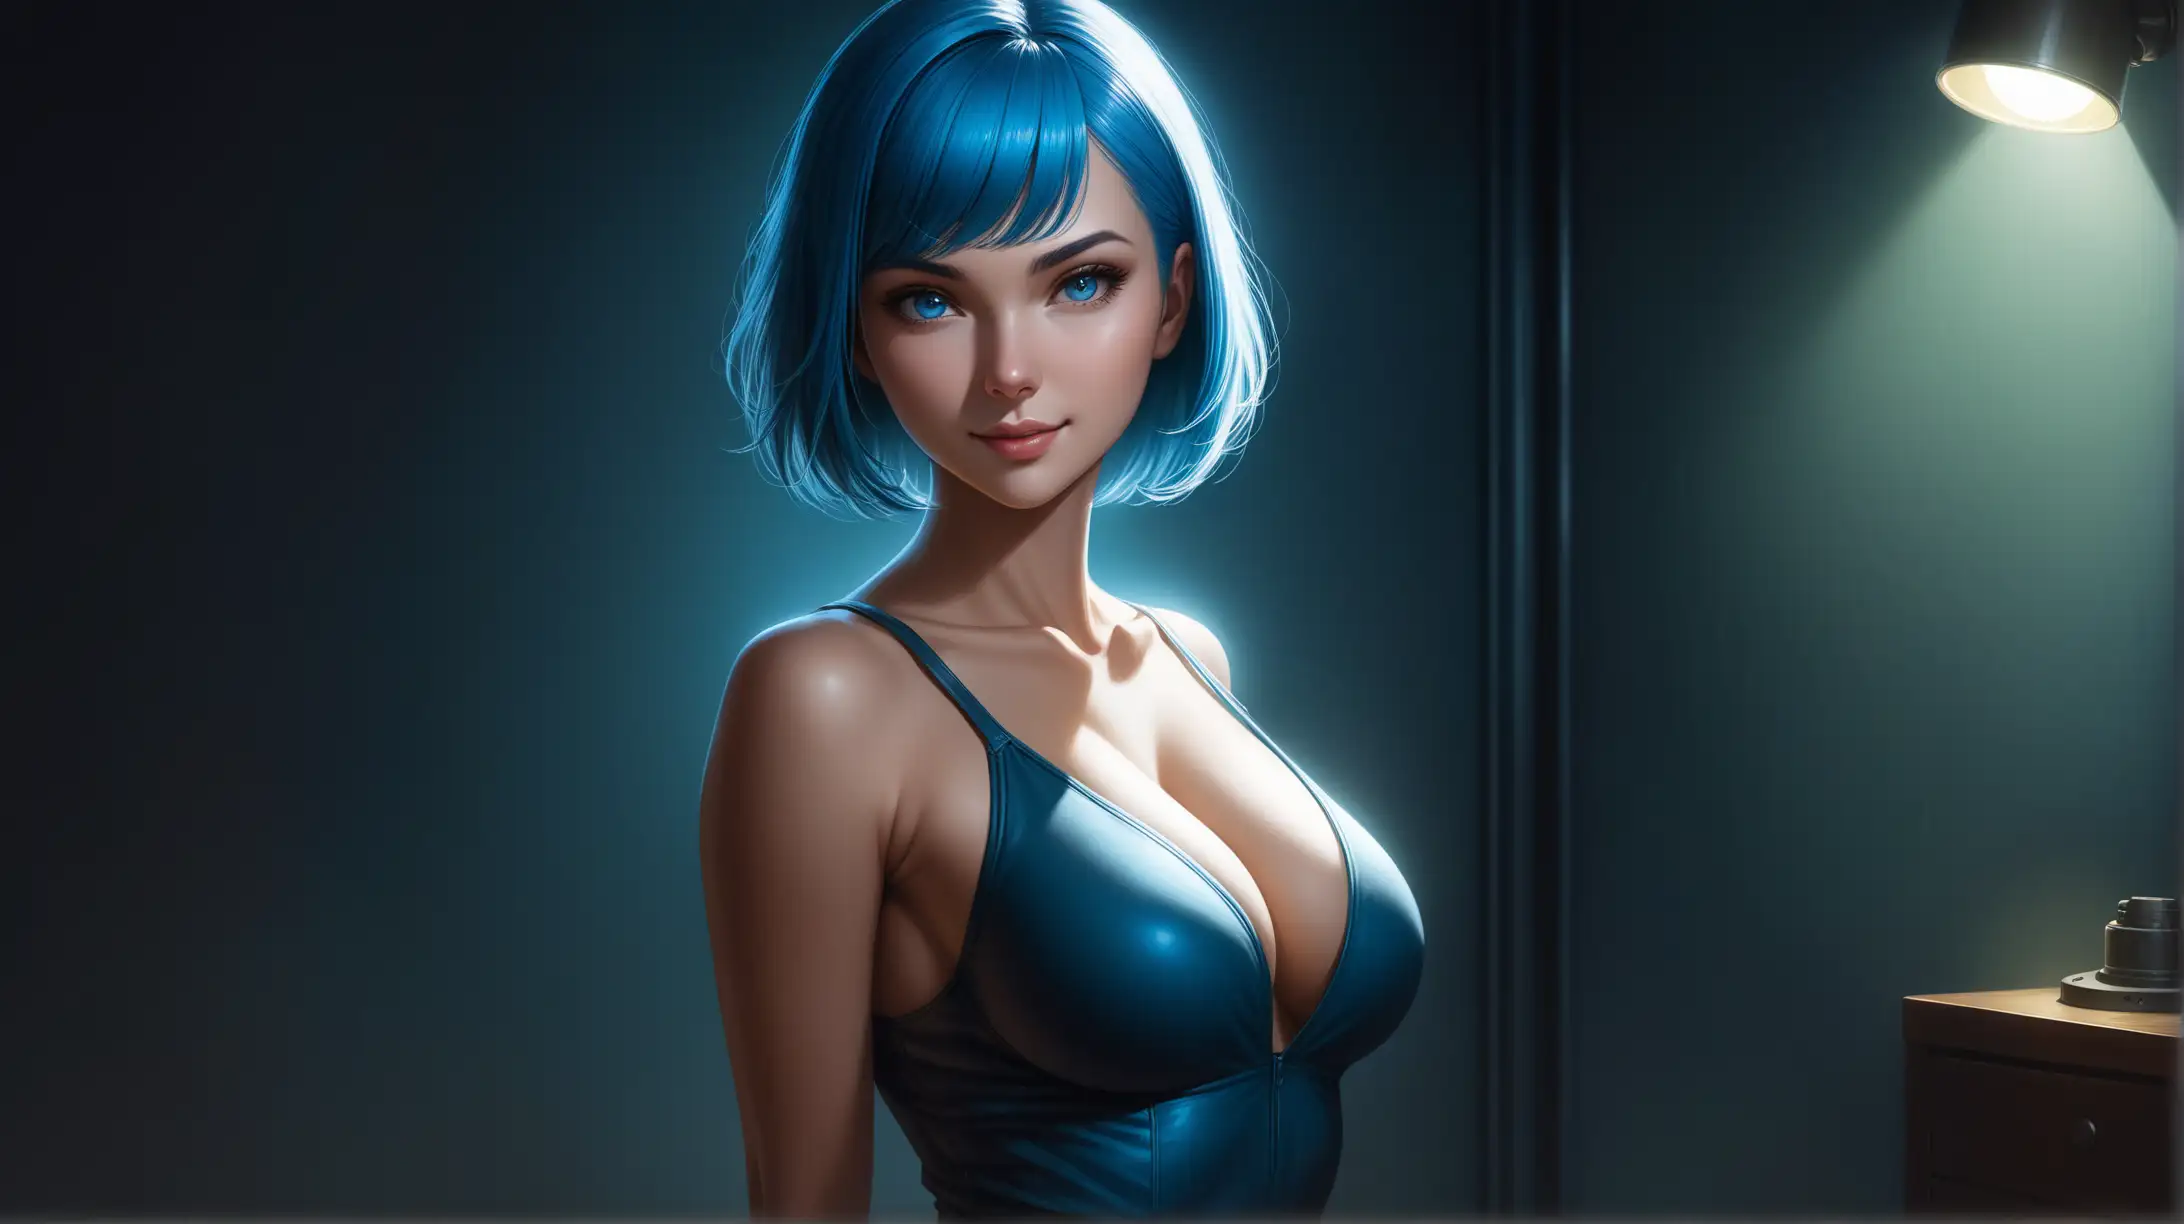 Draw a woman, short blue hair, flat bangs covering one eye, blue eyes, slender figure with a large bust, high quality, detailed, realistic, accurate, long shot, night lighting, indoors, seductive pose, outfit inspired from the Fallout series, smiling at the viewer